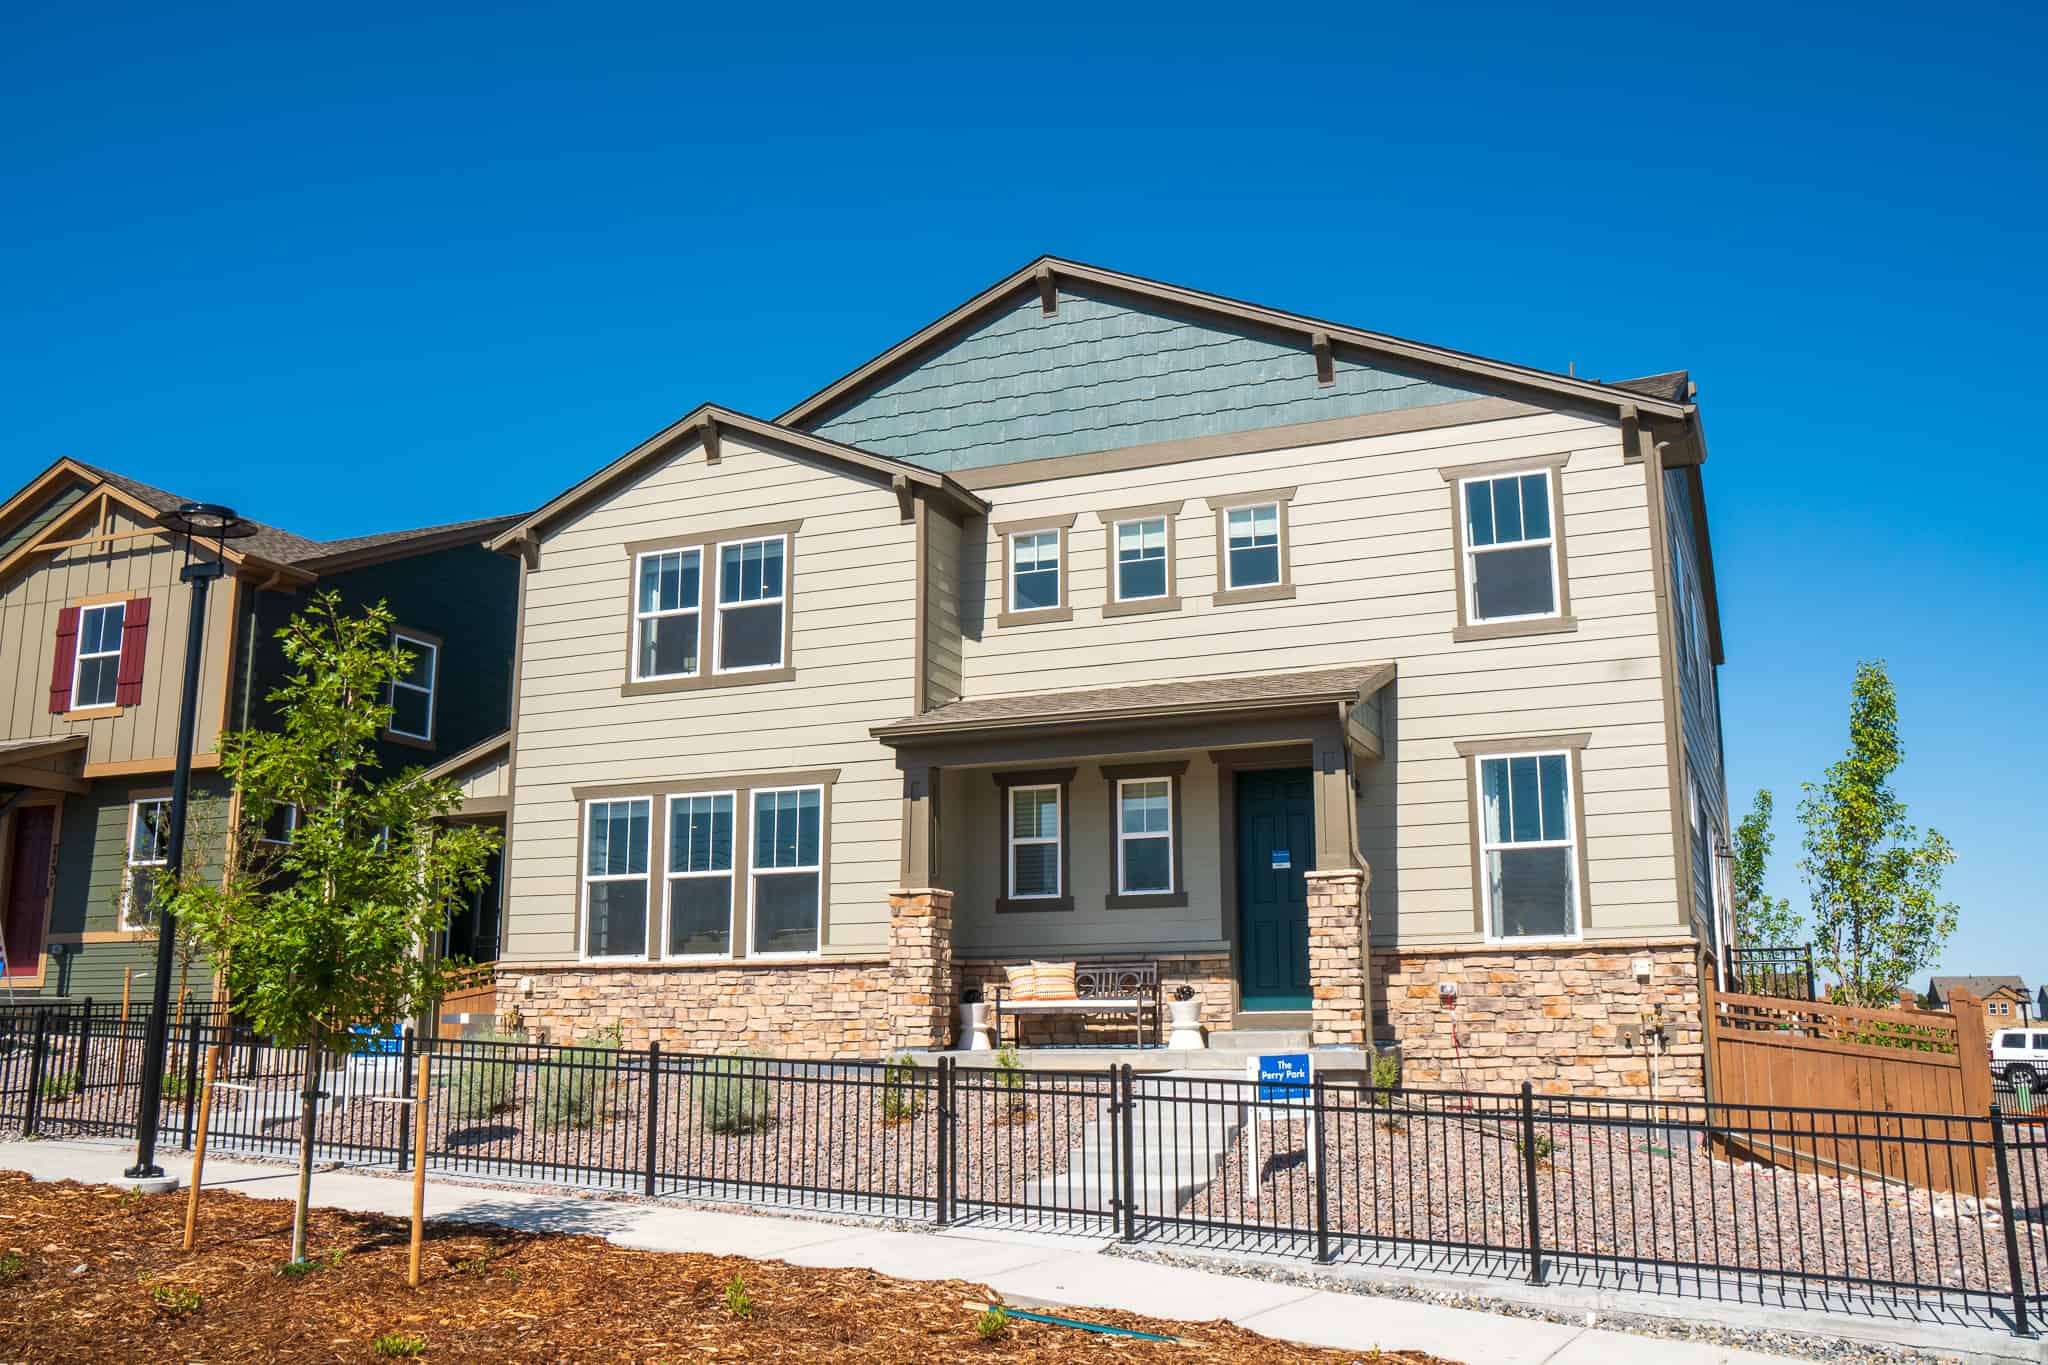 Castle Valley - The Town Collection by Meritage Homes